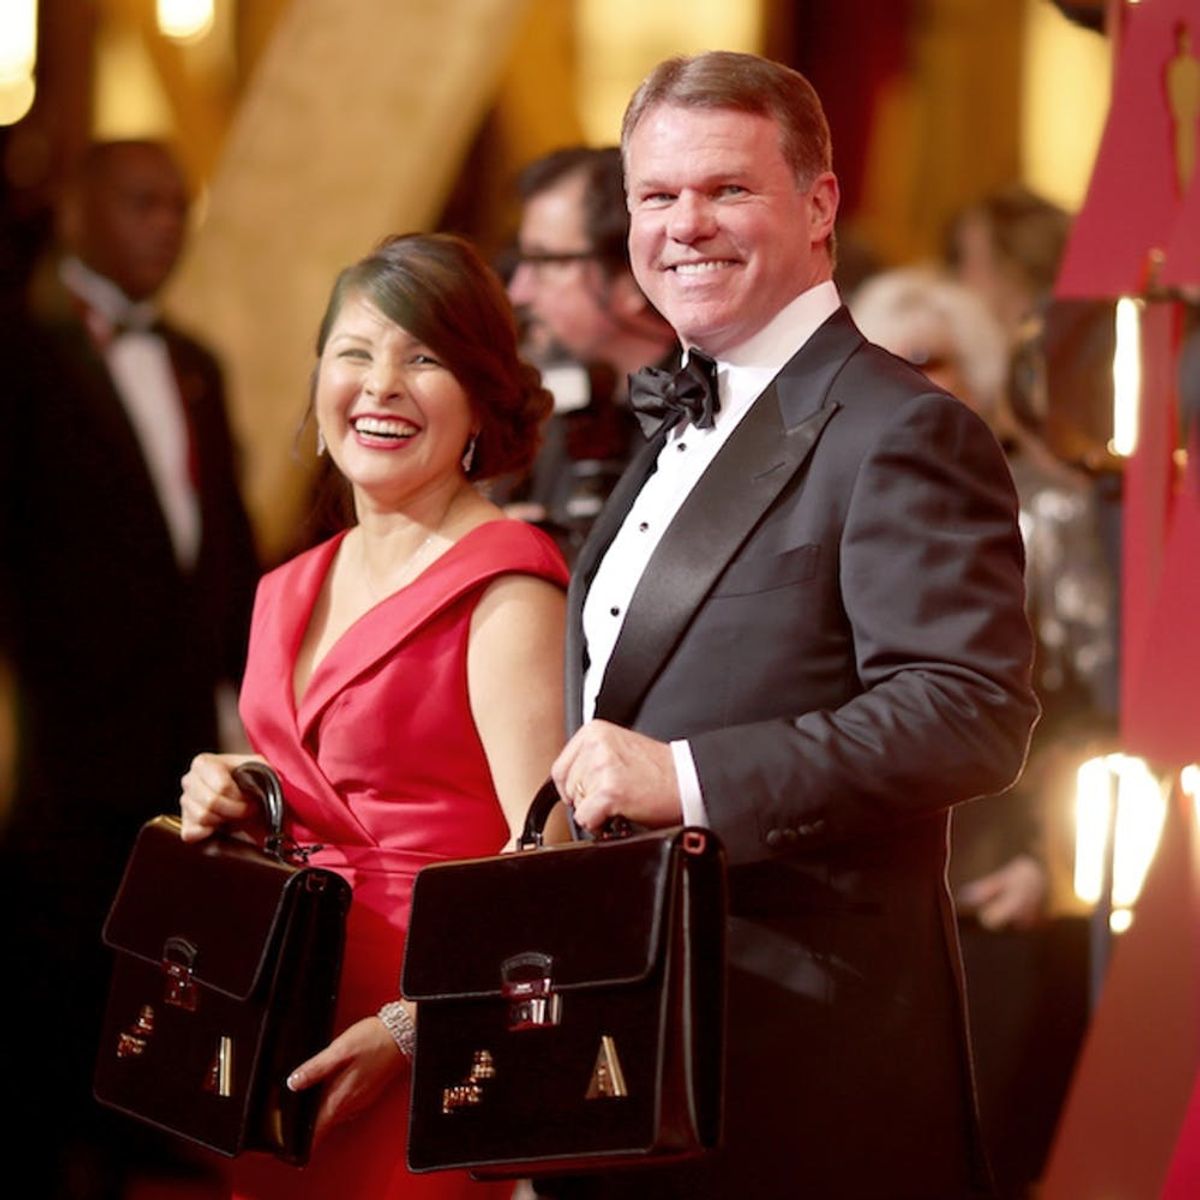 Morning Buzz! Here’s What Will Happen to the People Who Caused the Oscars Mix-Up + More